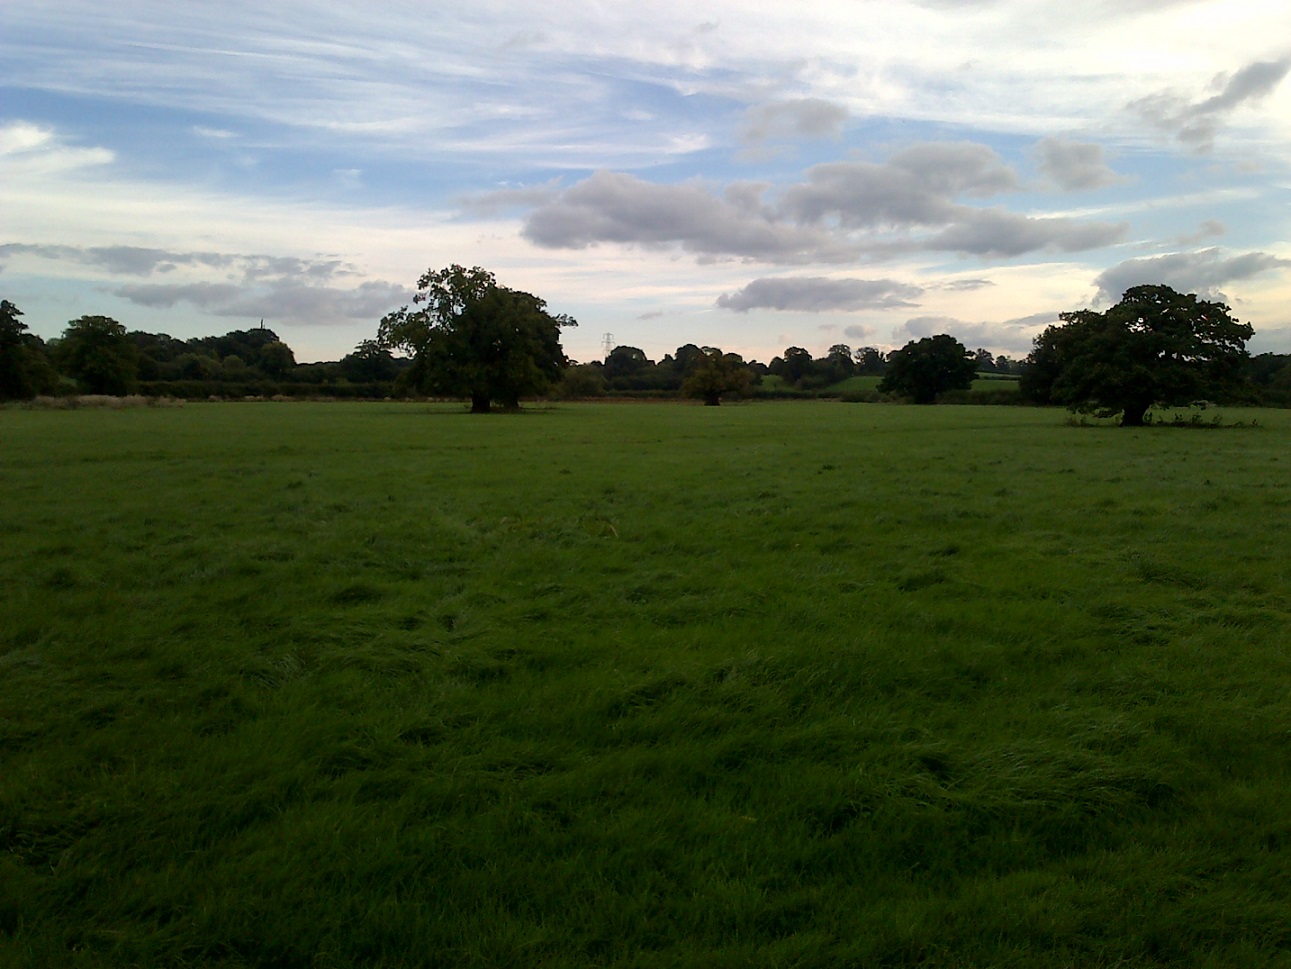 Oaks trees and hedges viewed amidst meadows on an early autumn evening